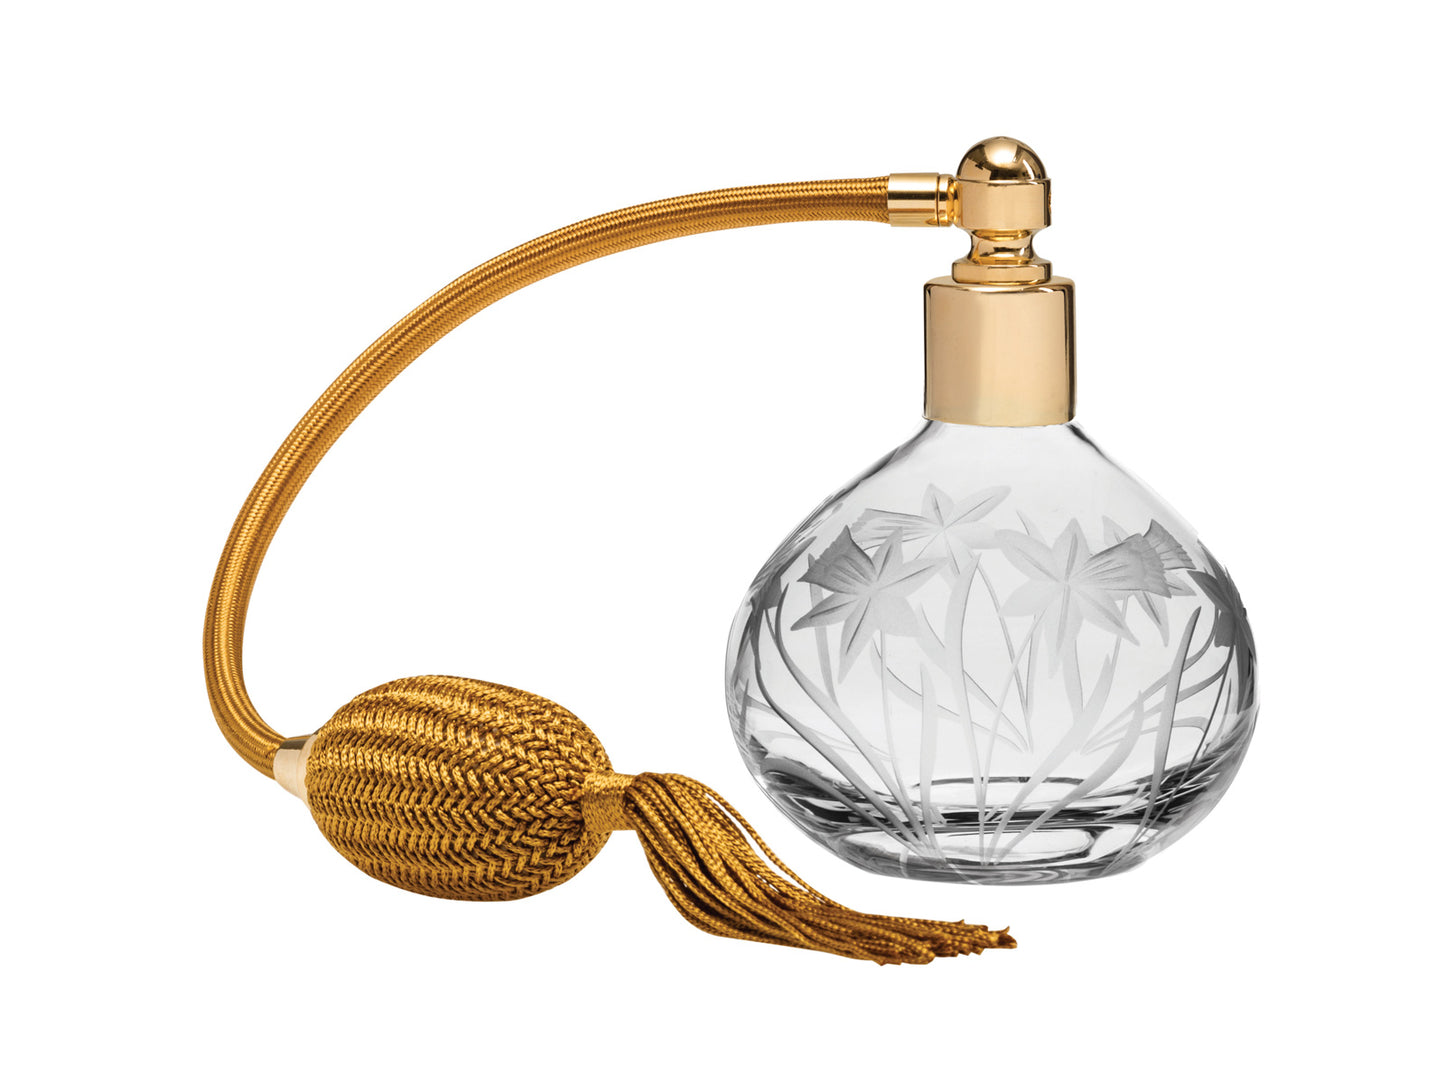 A crystal perfume bottle with a daffodil design and gold puffer